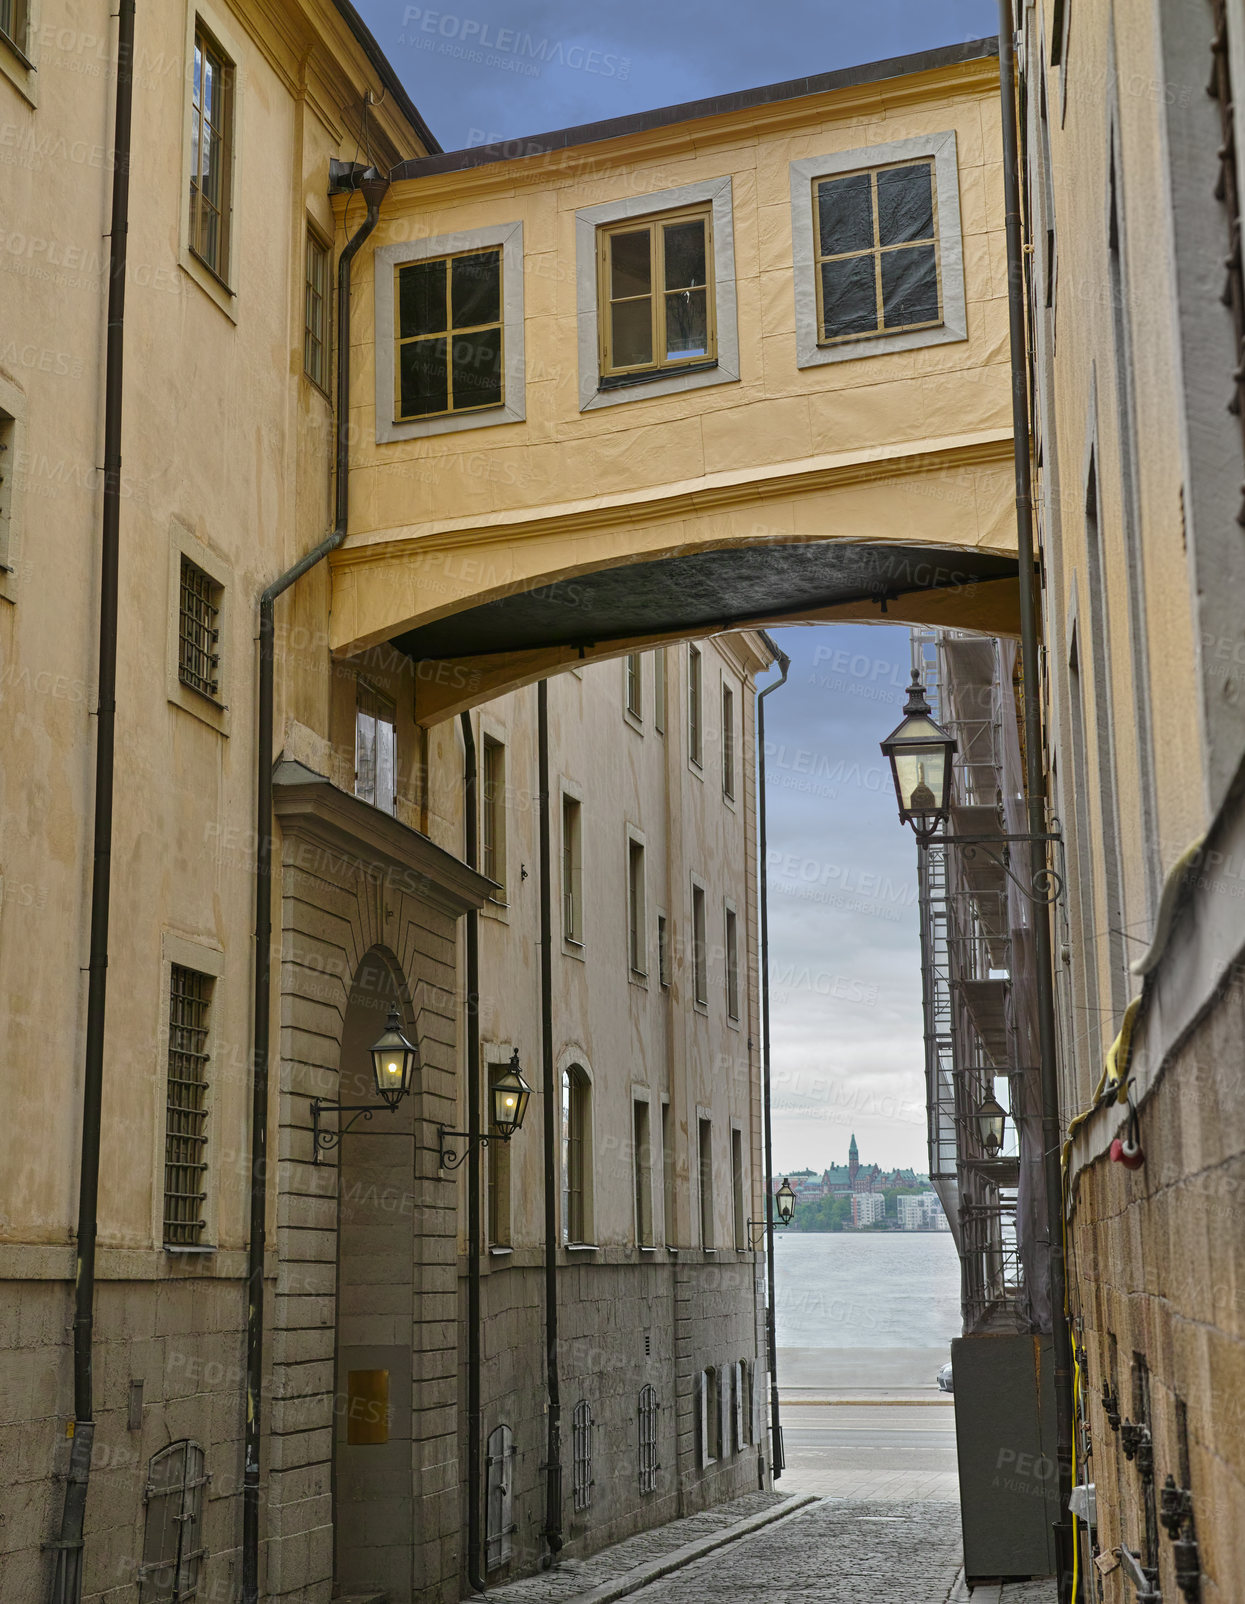 Buy stock photo Skybridge, architecture and city with vintage building in old town with history, culture and calm holiday destination. Vacation, travel or quiet alley in Sweden with retro aesthetic in ancient street